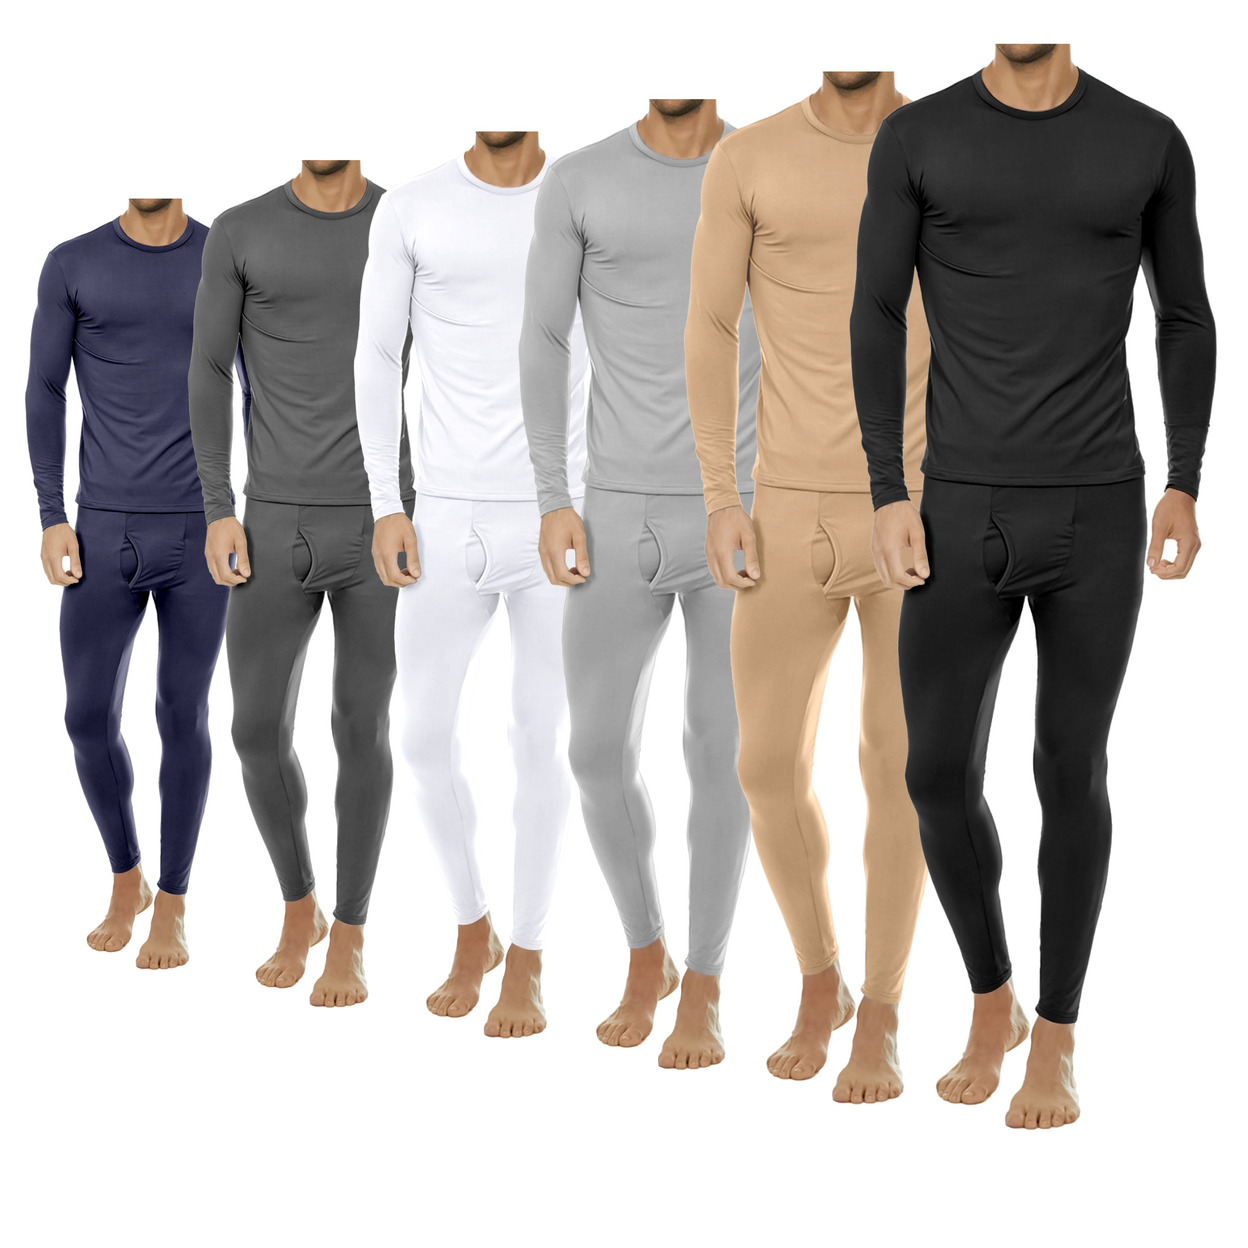 2-Sets: Men's Winter Warm Fleece Lined Thermal Underwear Set For Cold Weather - Black&black, Small